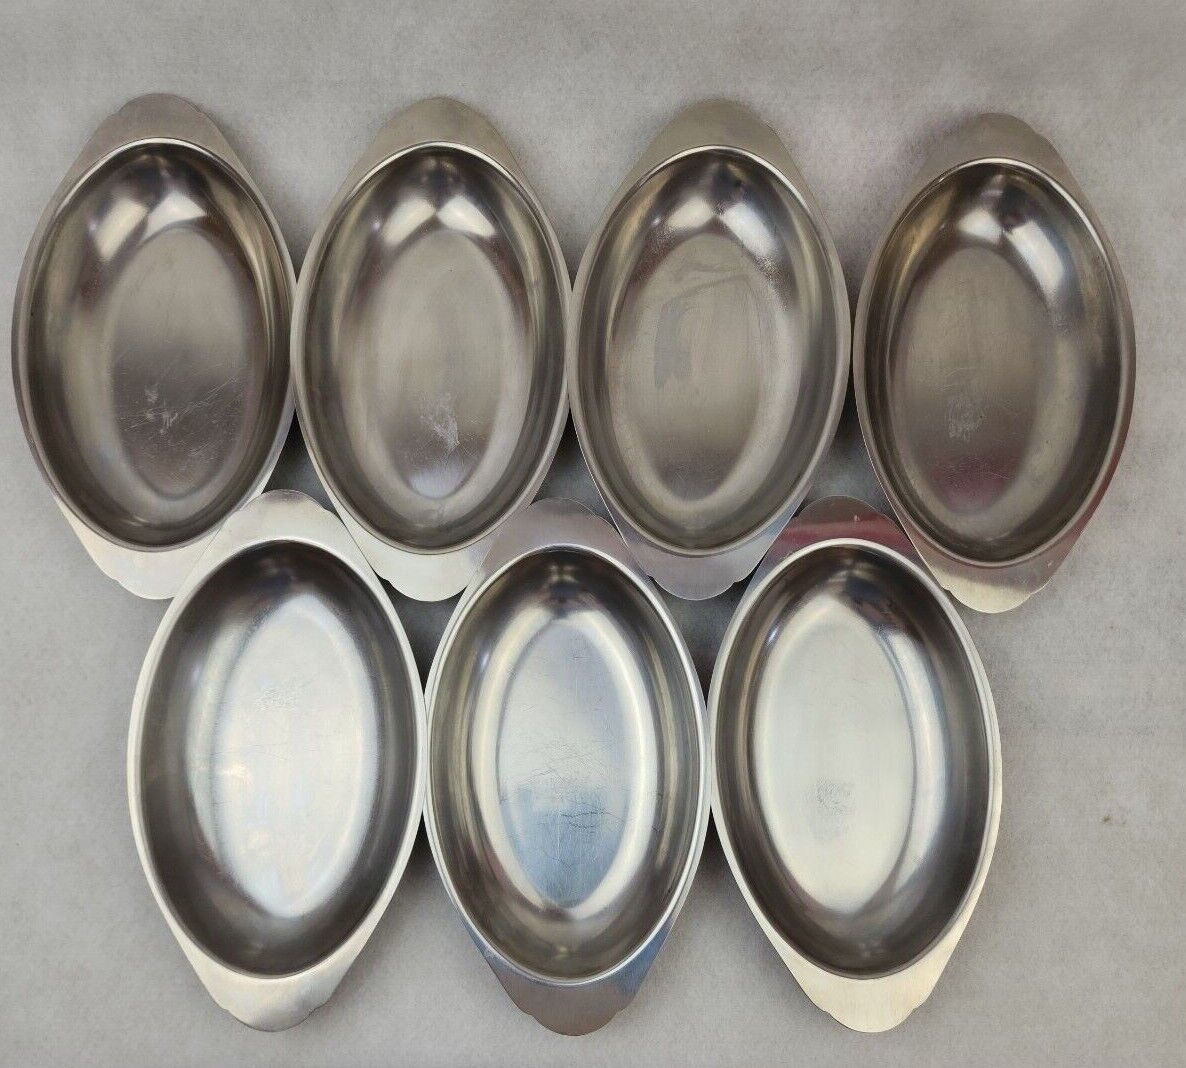 SERCO 18- B Stainless Steel Oval Side Serving No - 60660 Lot 0f 7 Made in Japan